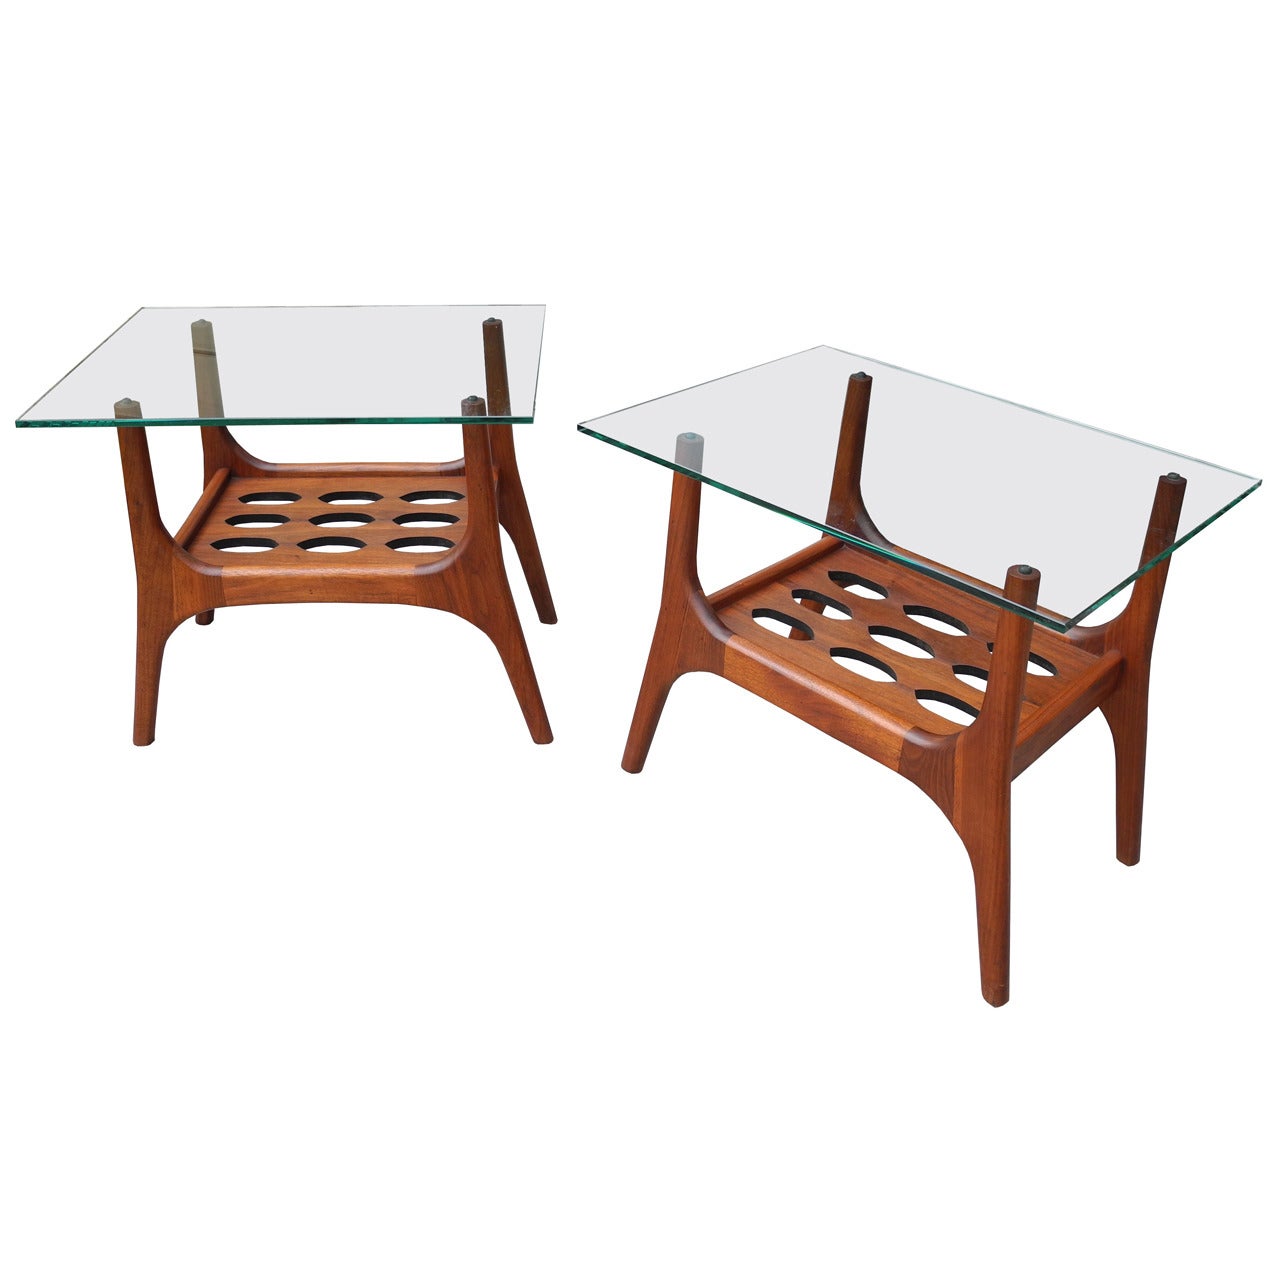 Organically Sculpted Walnut Mid-Century Modern Night Stands or Side Tables